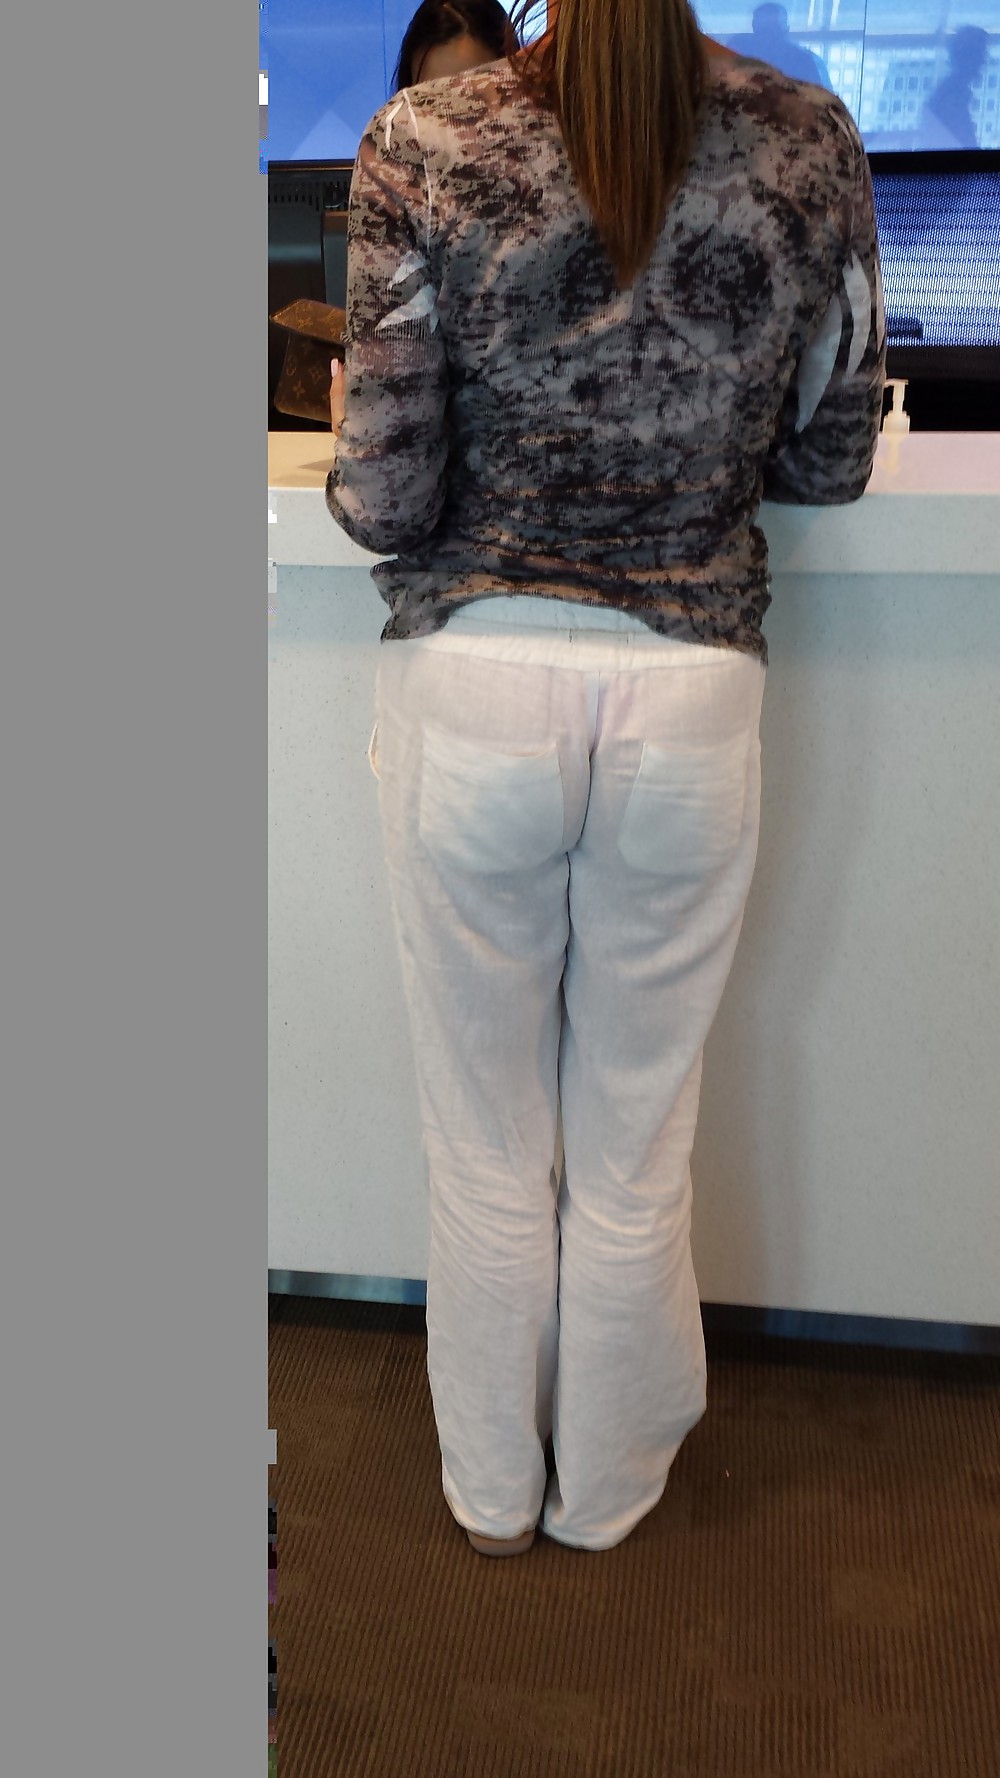 Sexy See-Thru Pants on Milf at Airport #36972956